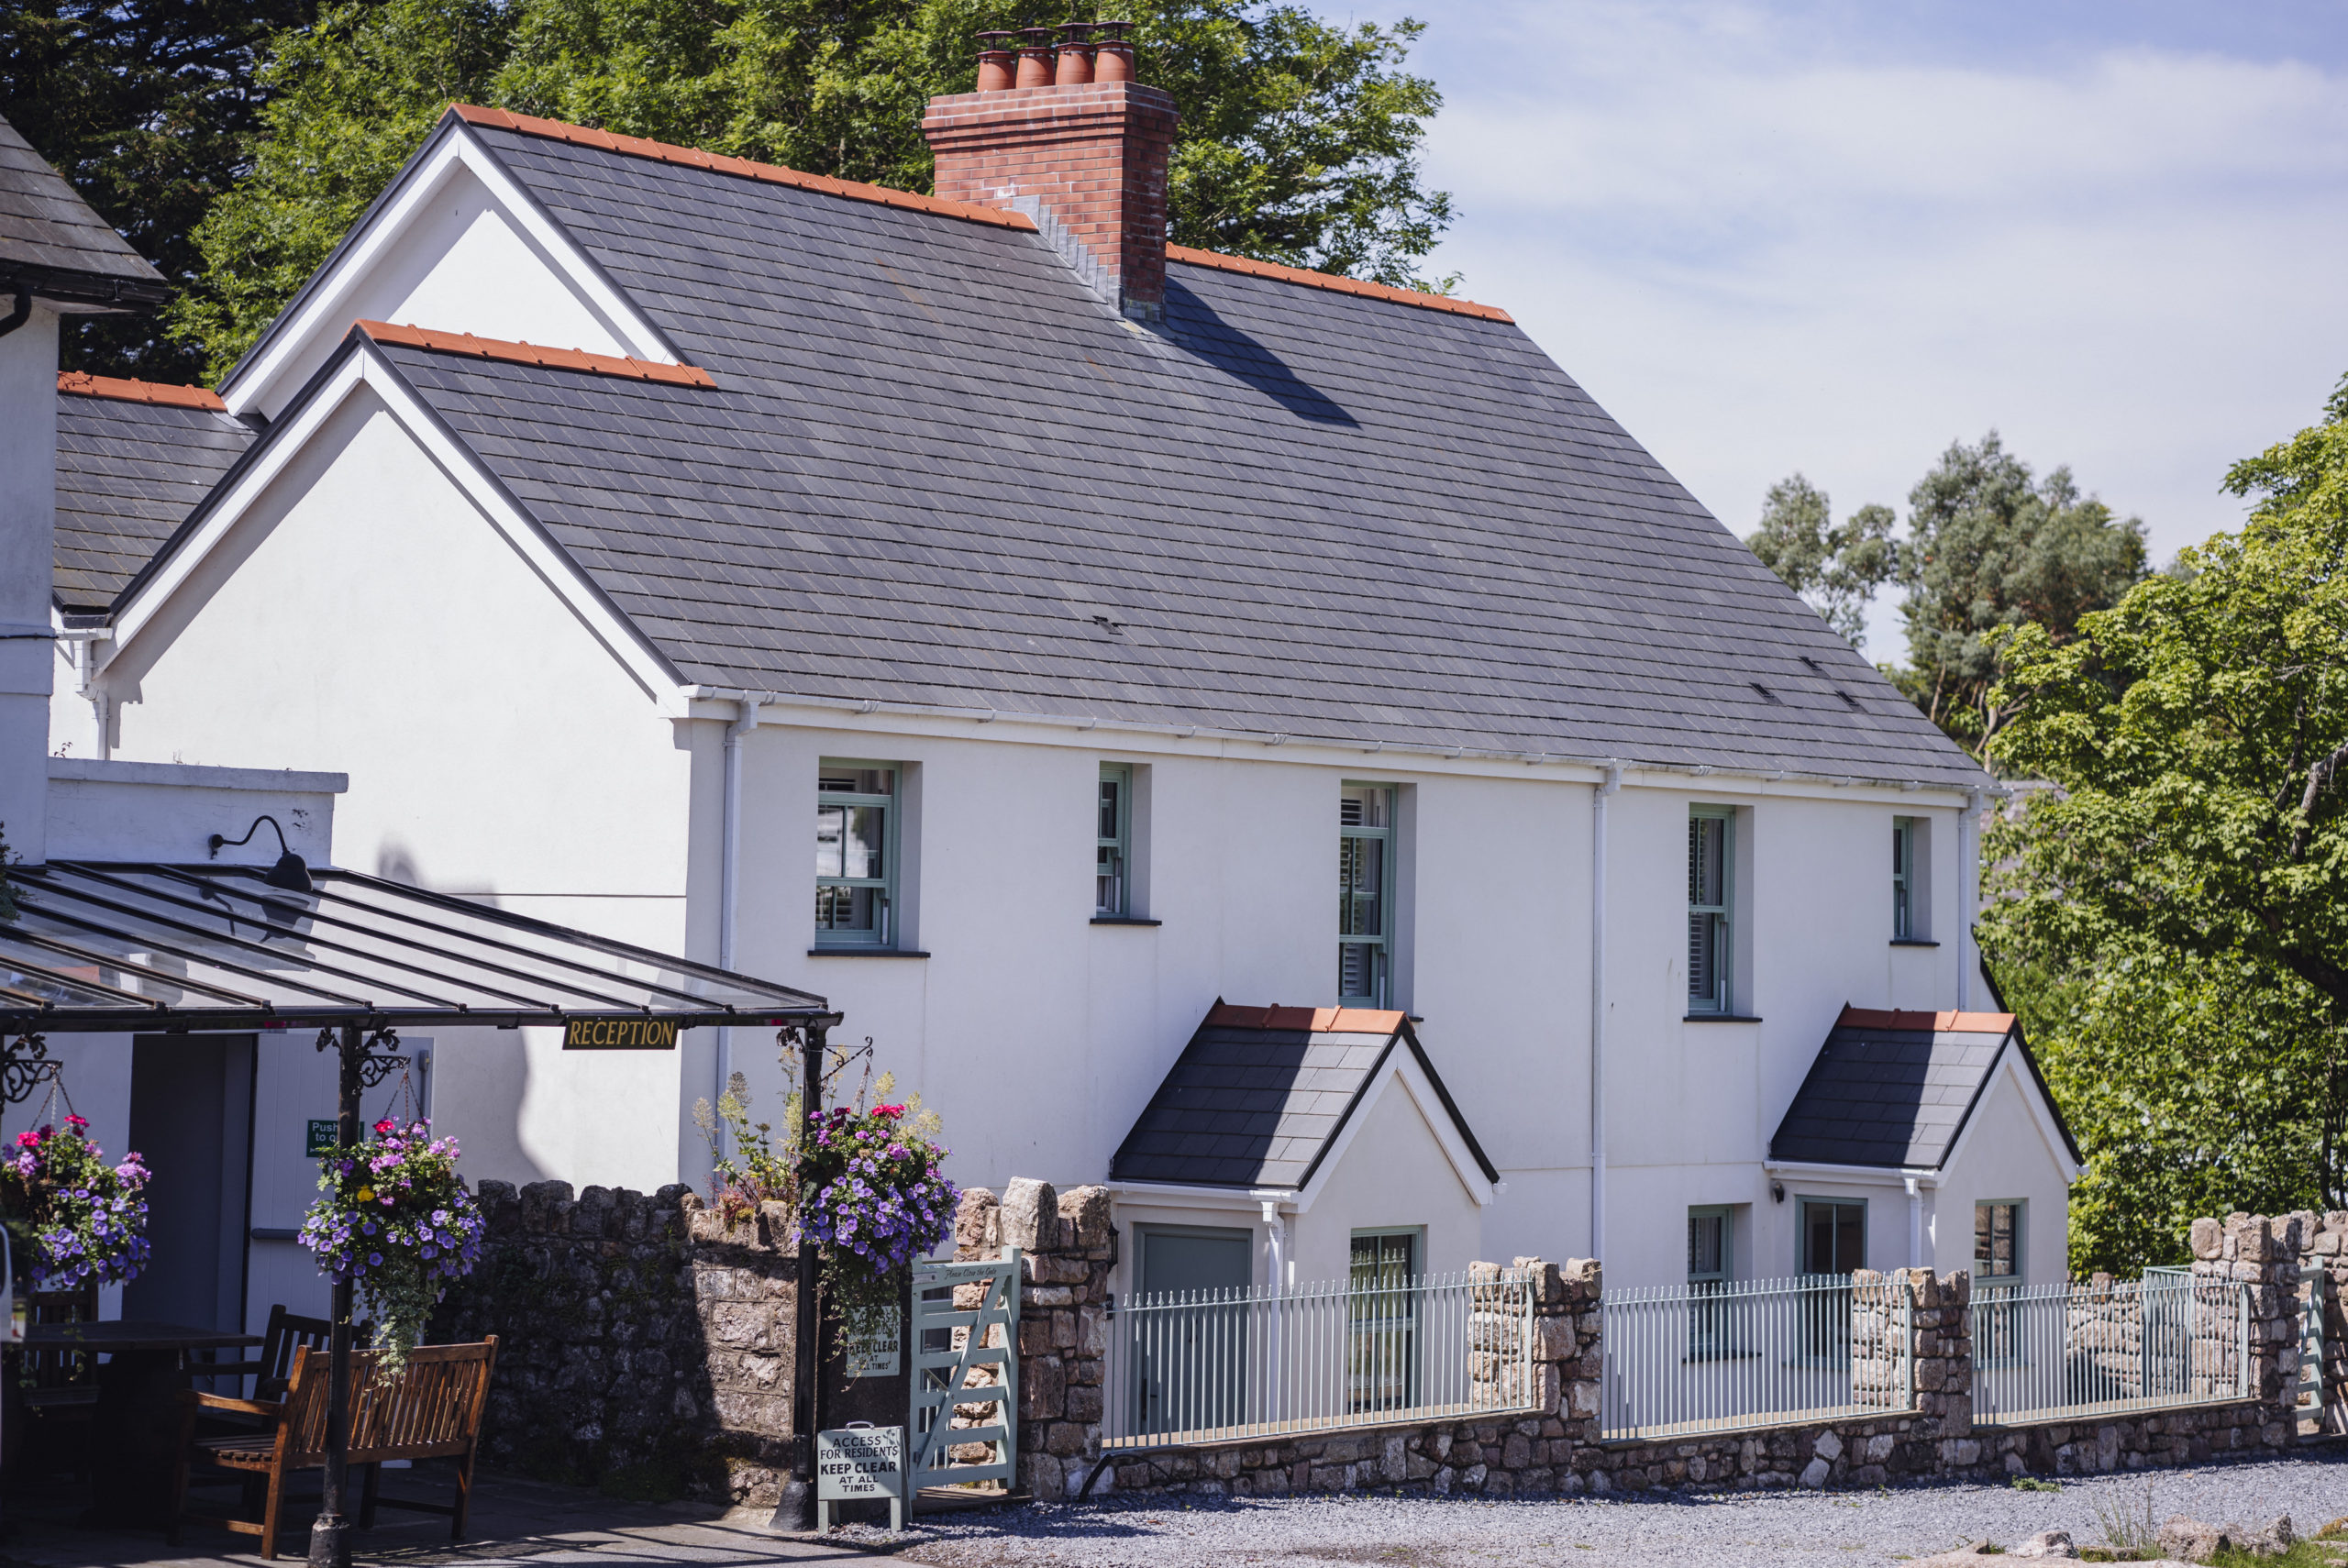 self catering cottages on Gower